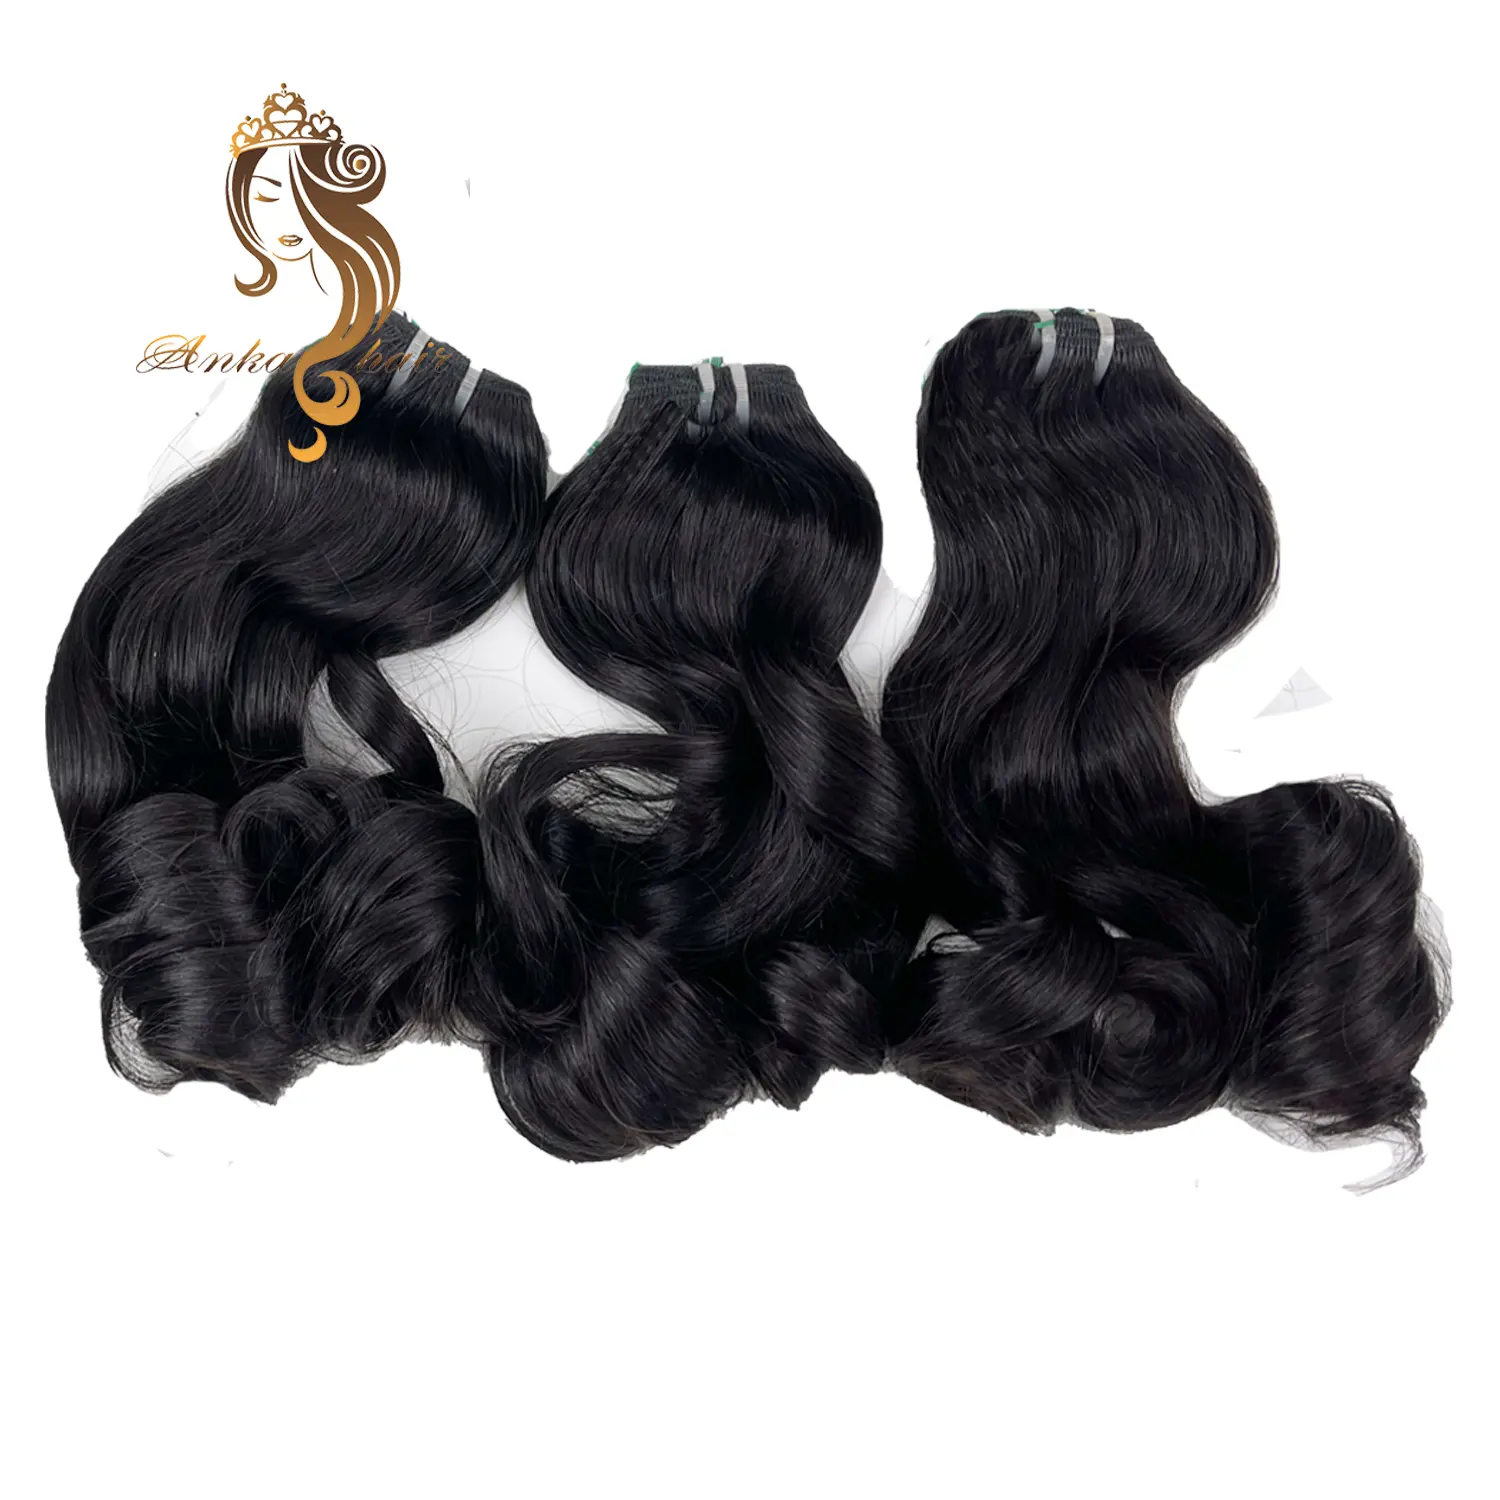 Curly Hairstyle in black colors for a simple natural but mystery look - high quality products from Anka